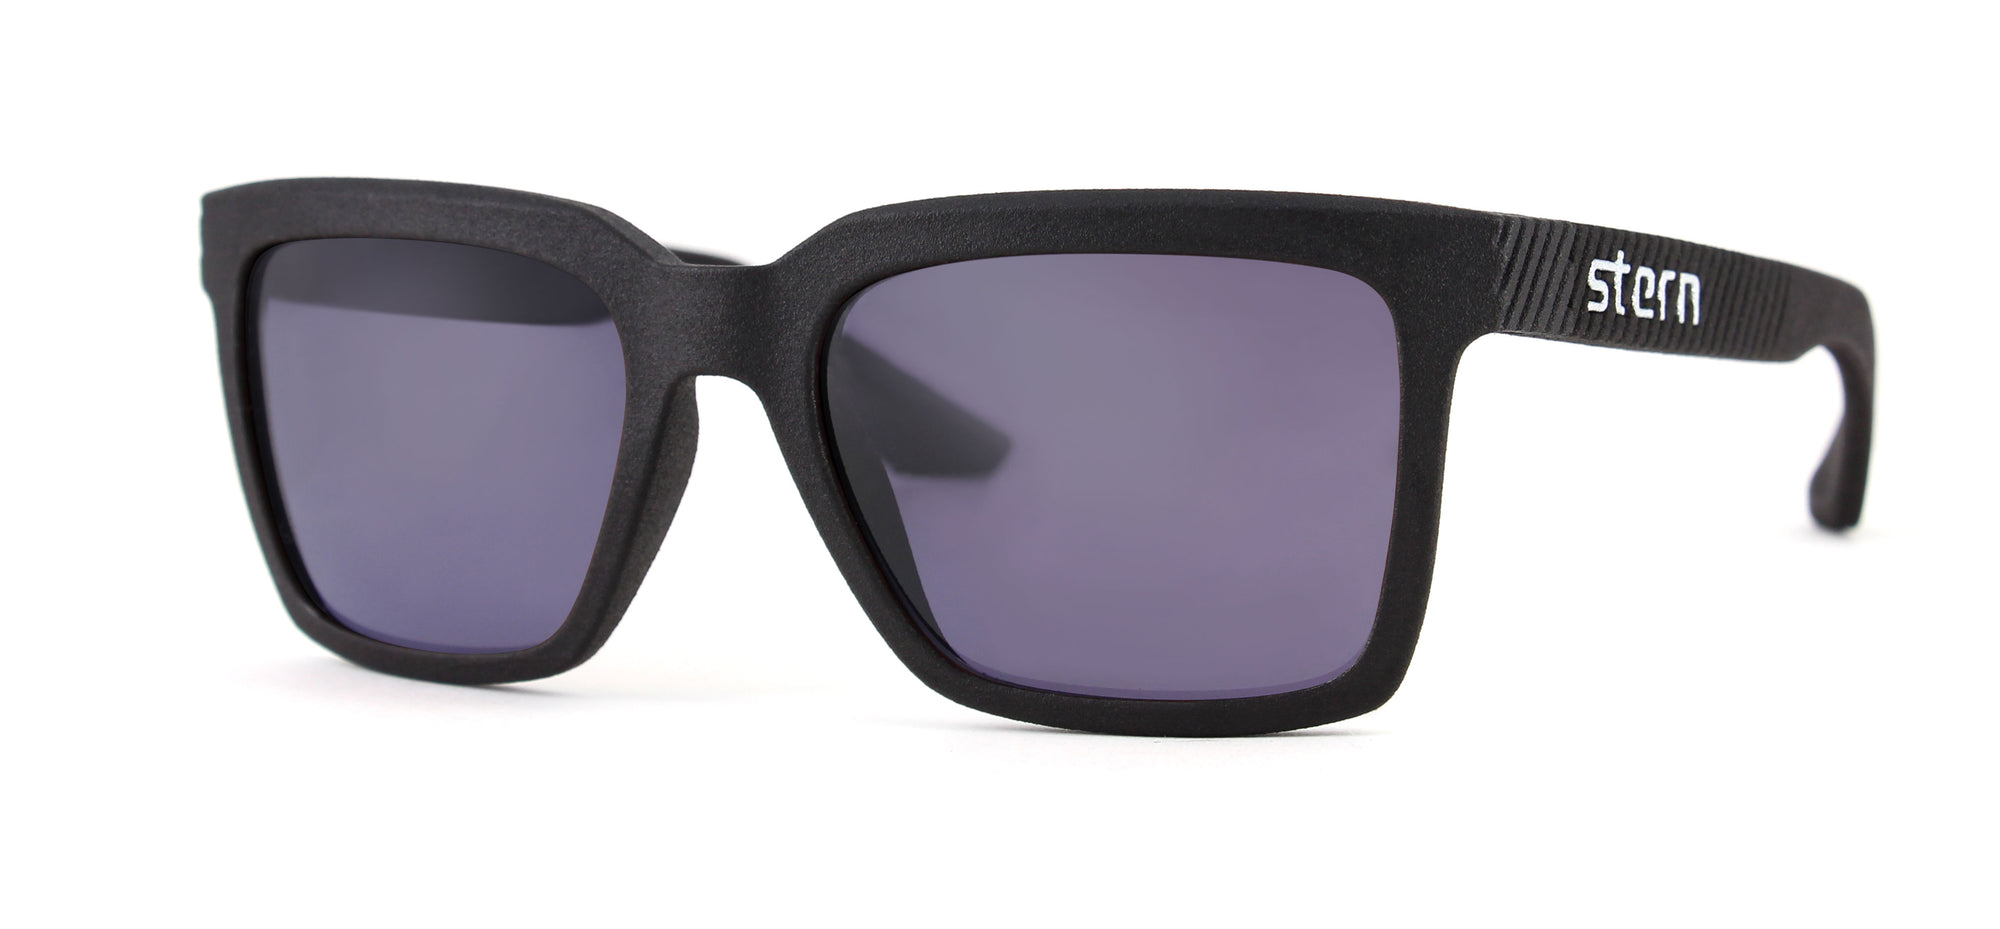 Polarized sunglasses with grey tint that blocks out harmful UV420 rays. Sunglasses are made in the USA through laser fusion 3D printing.